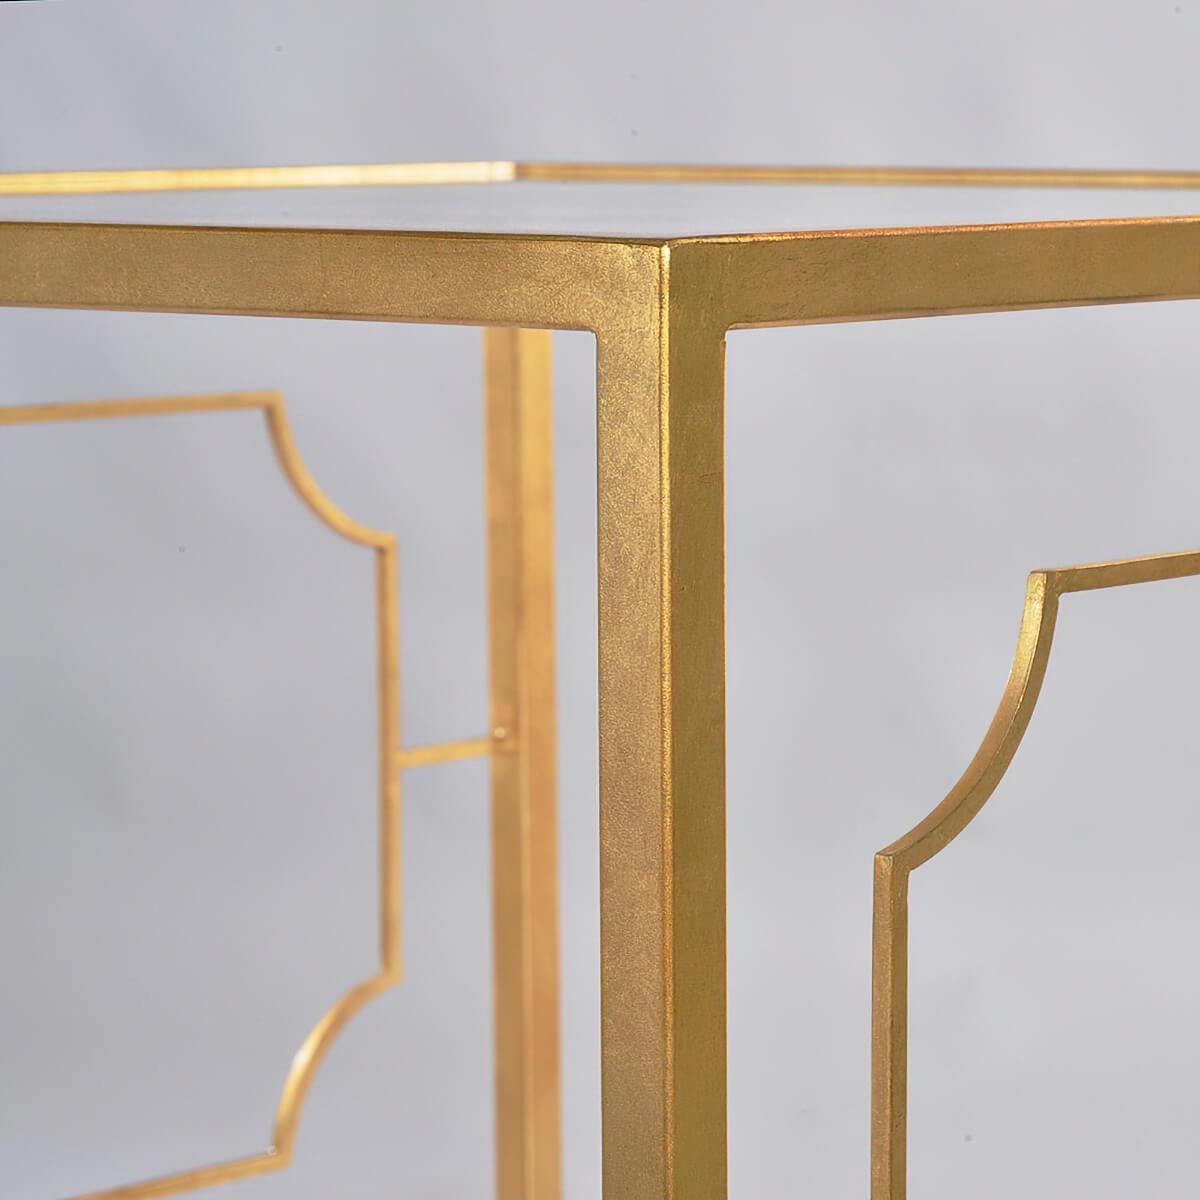 Midcentury square side table with clear tempered glass top and lower shelf, straight legs, and portrait frame detail on the table sides, has a “gold leaf” finish on a steel frame.

Dimensions: 25